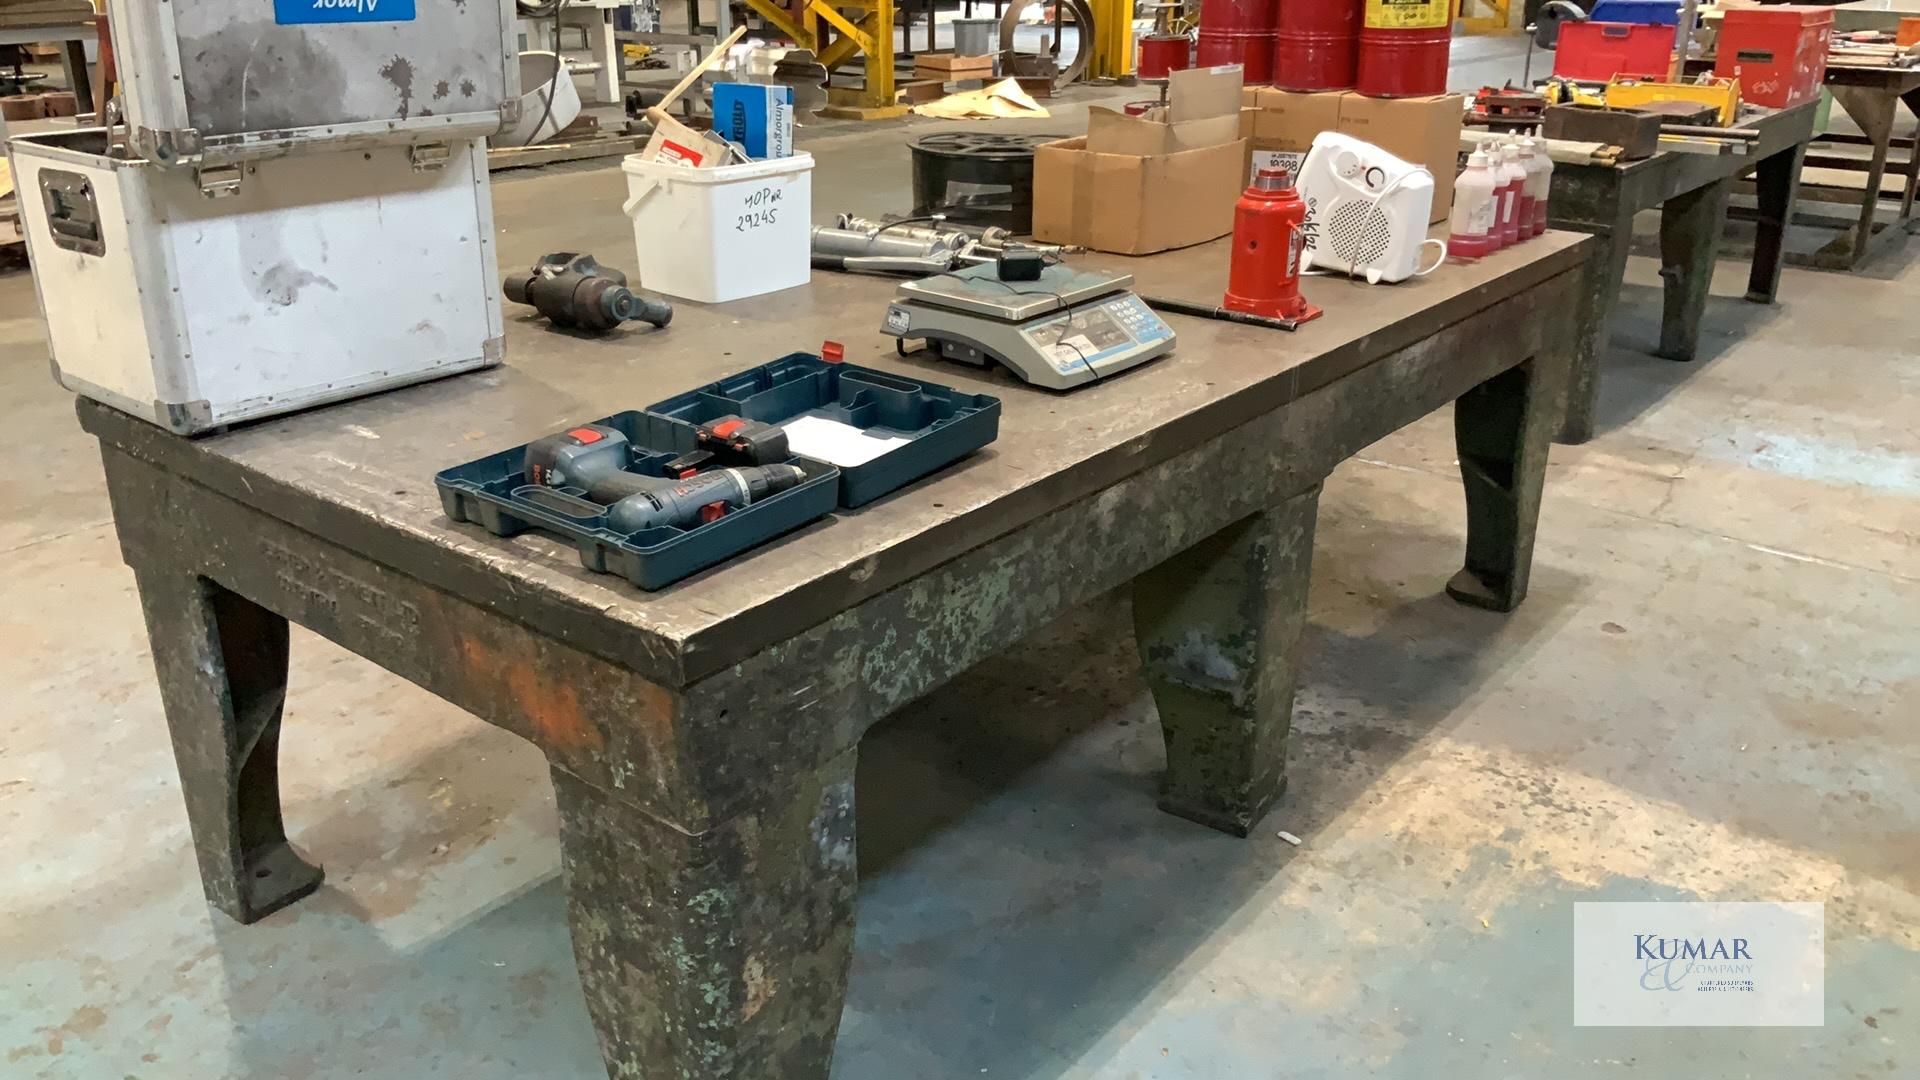 Webster & BennettLarge Welding Table - Dimensions 247cm x 122cm x 80cm Height - Please Note Does Not - Bild 7 aus 7